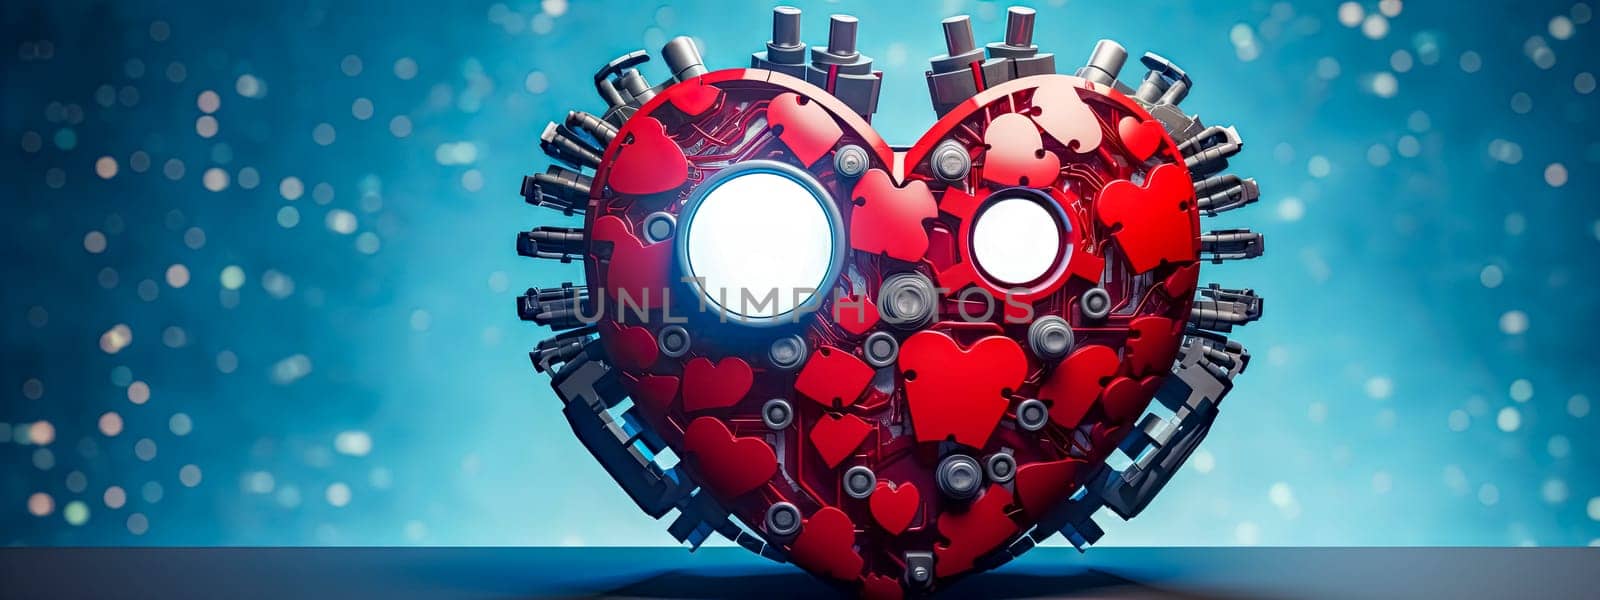 Robotic Heart Concept Art with Blue Bokeh Background.